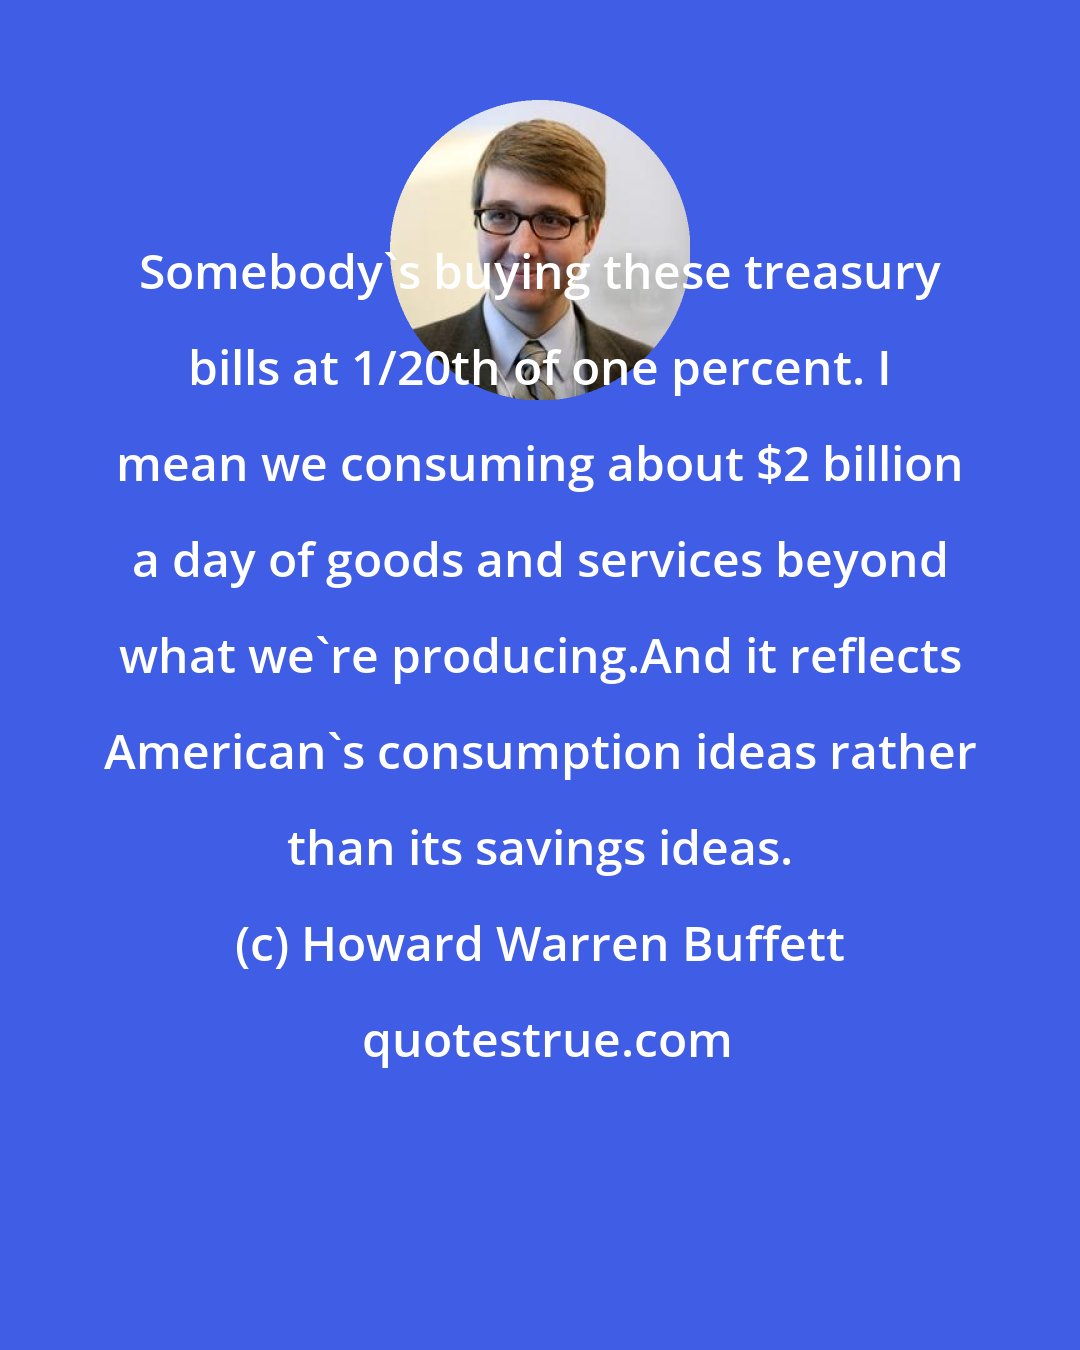 Howard Warren Buffett: Somebody's buying these treasury bills at 1/20th of one percent. I mean we consuming about $2 billion a day of goods and services beyond what we're producing.And it reflects American's consumption ideas rather than its savings ideas.